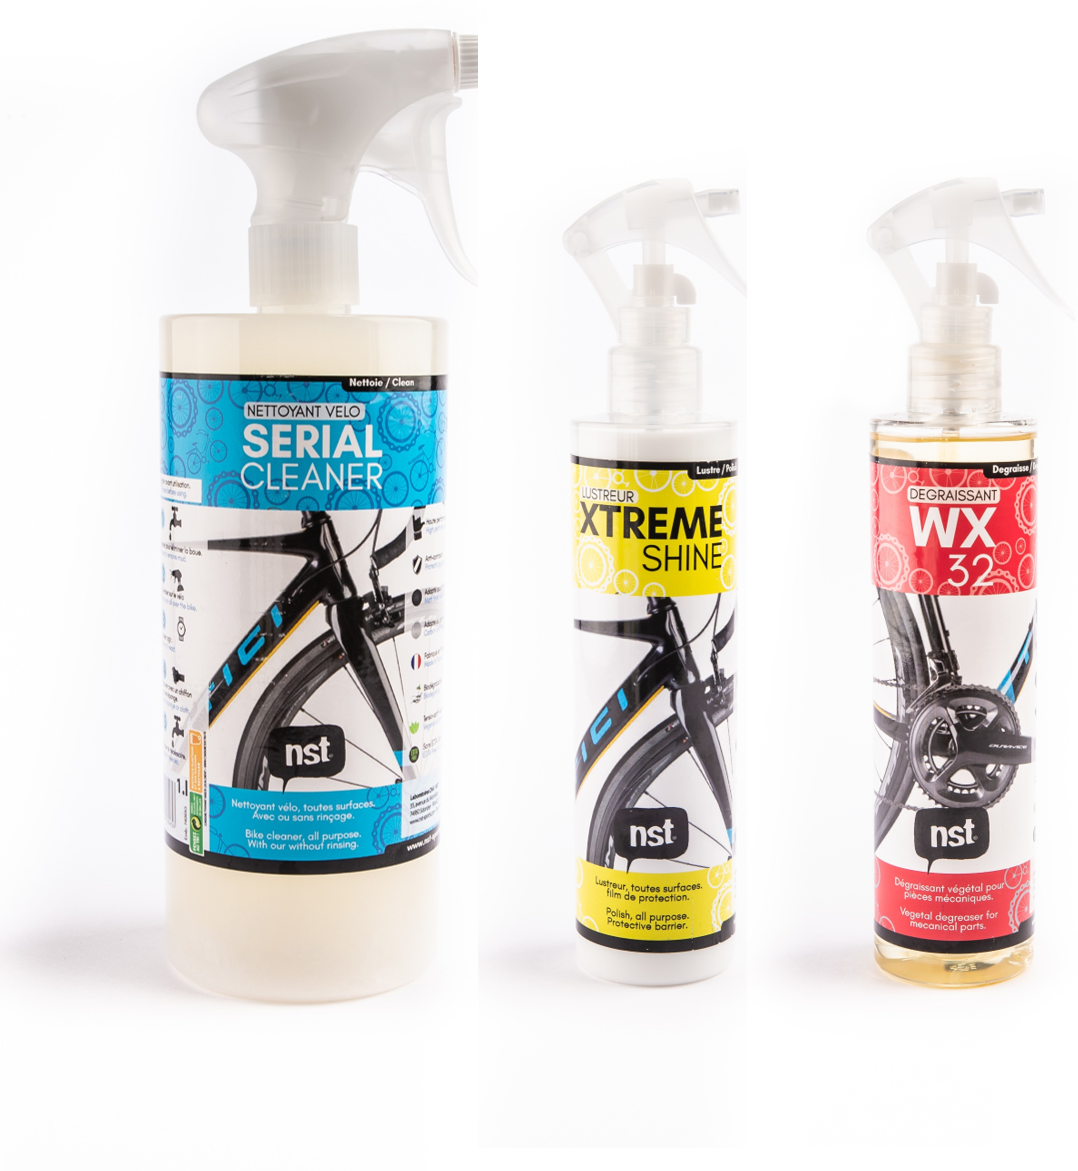 NST Serial Cleaner + WX32 + Xtreme Shine